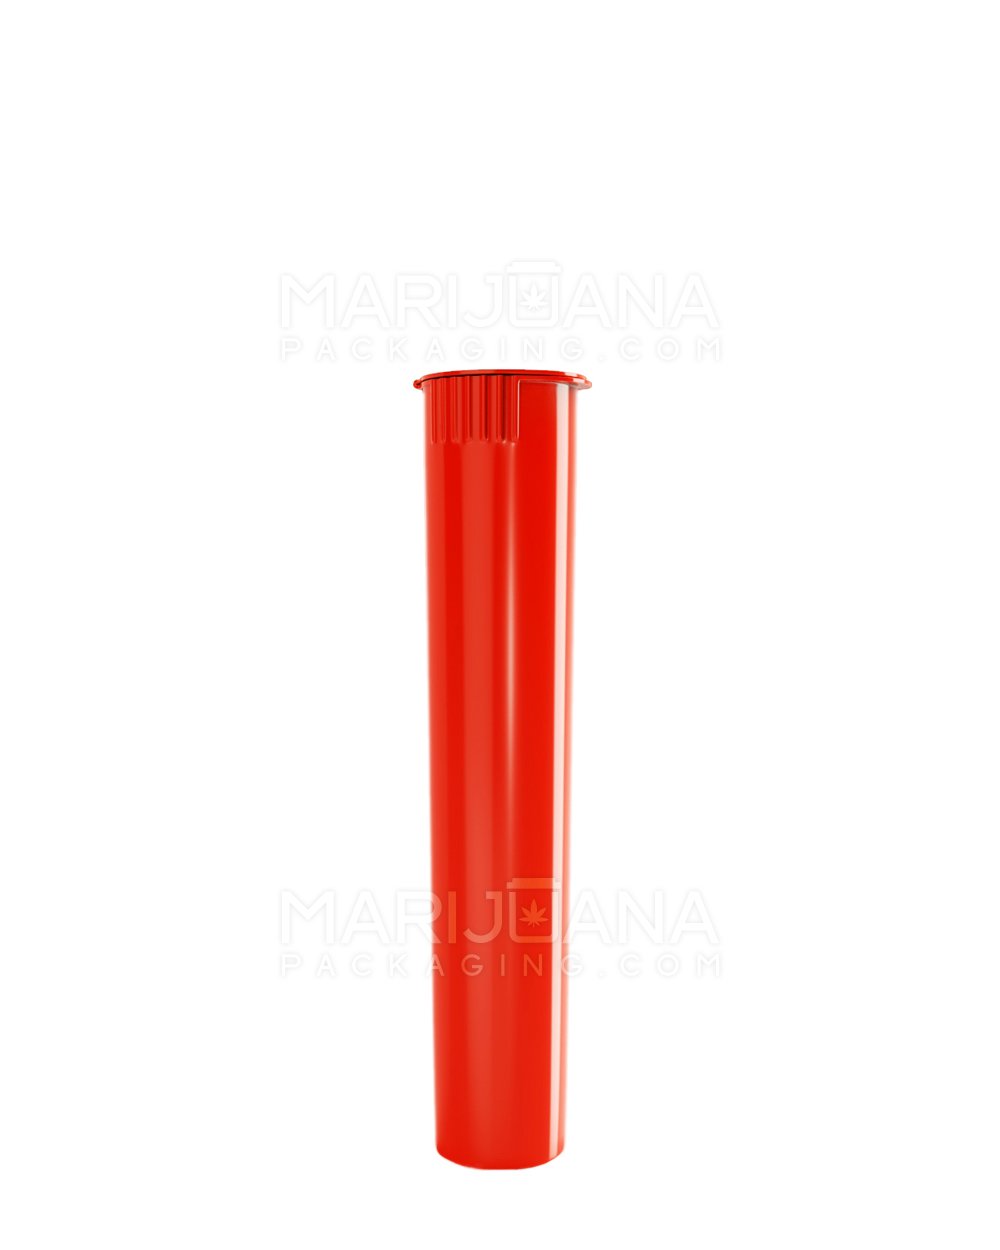 Child Resistant | Pop Top Opaque Plastic Pre-Roll Tubes | 95mm - Red - 1000 Count - 2